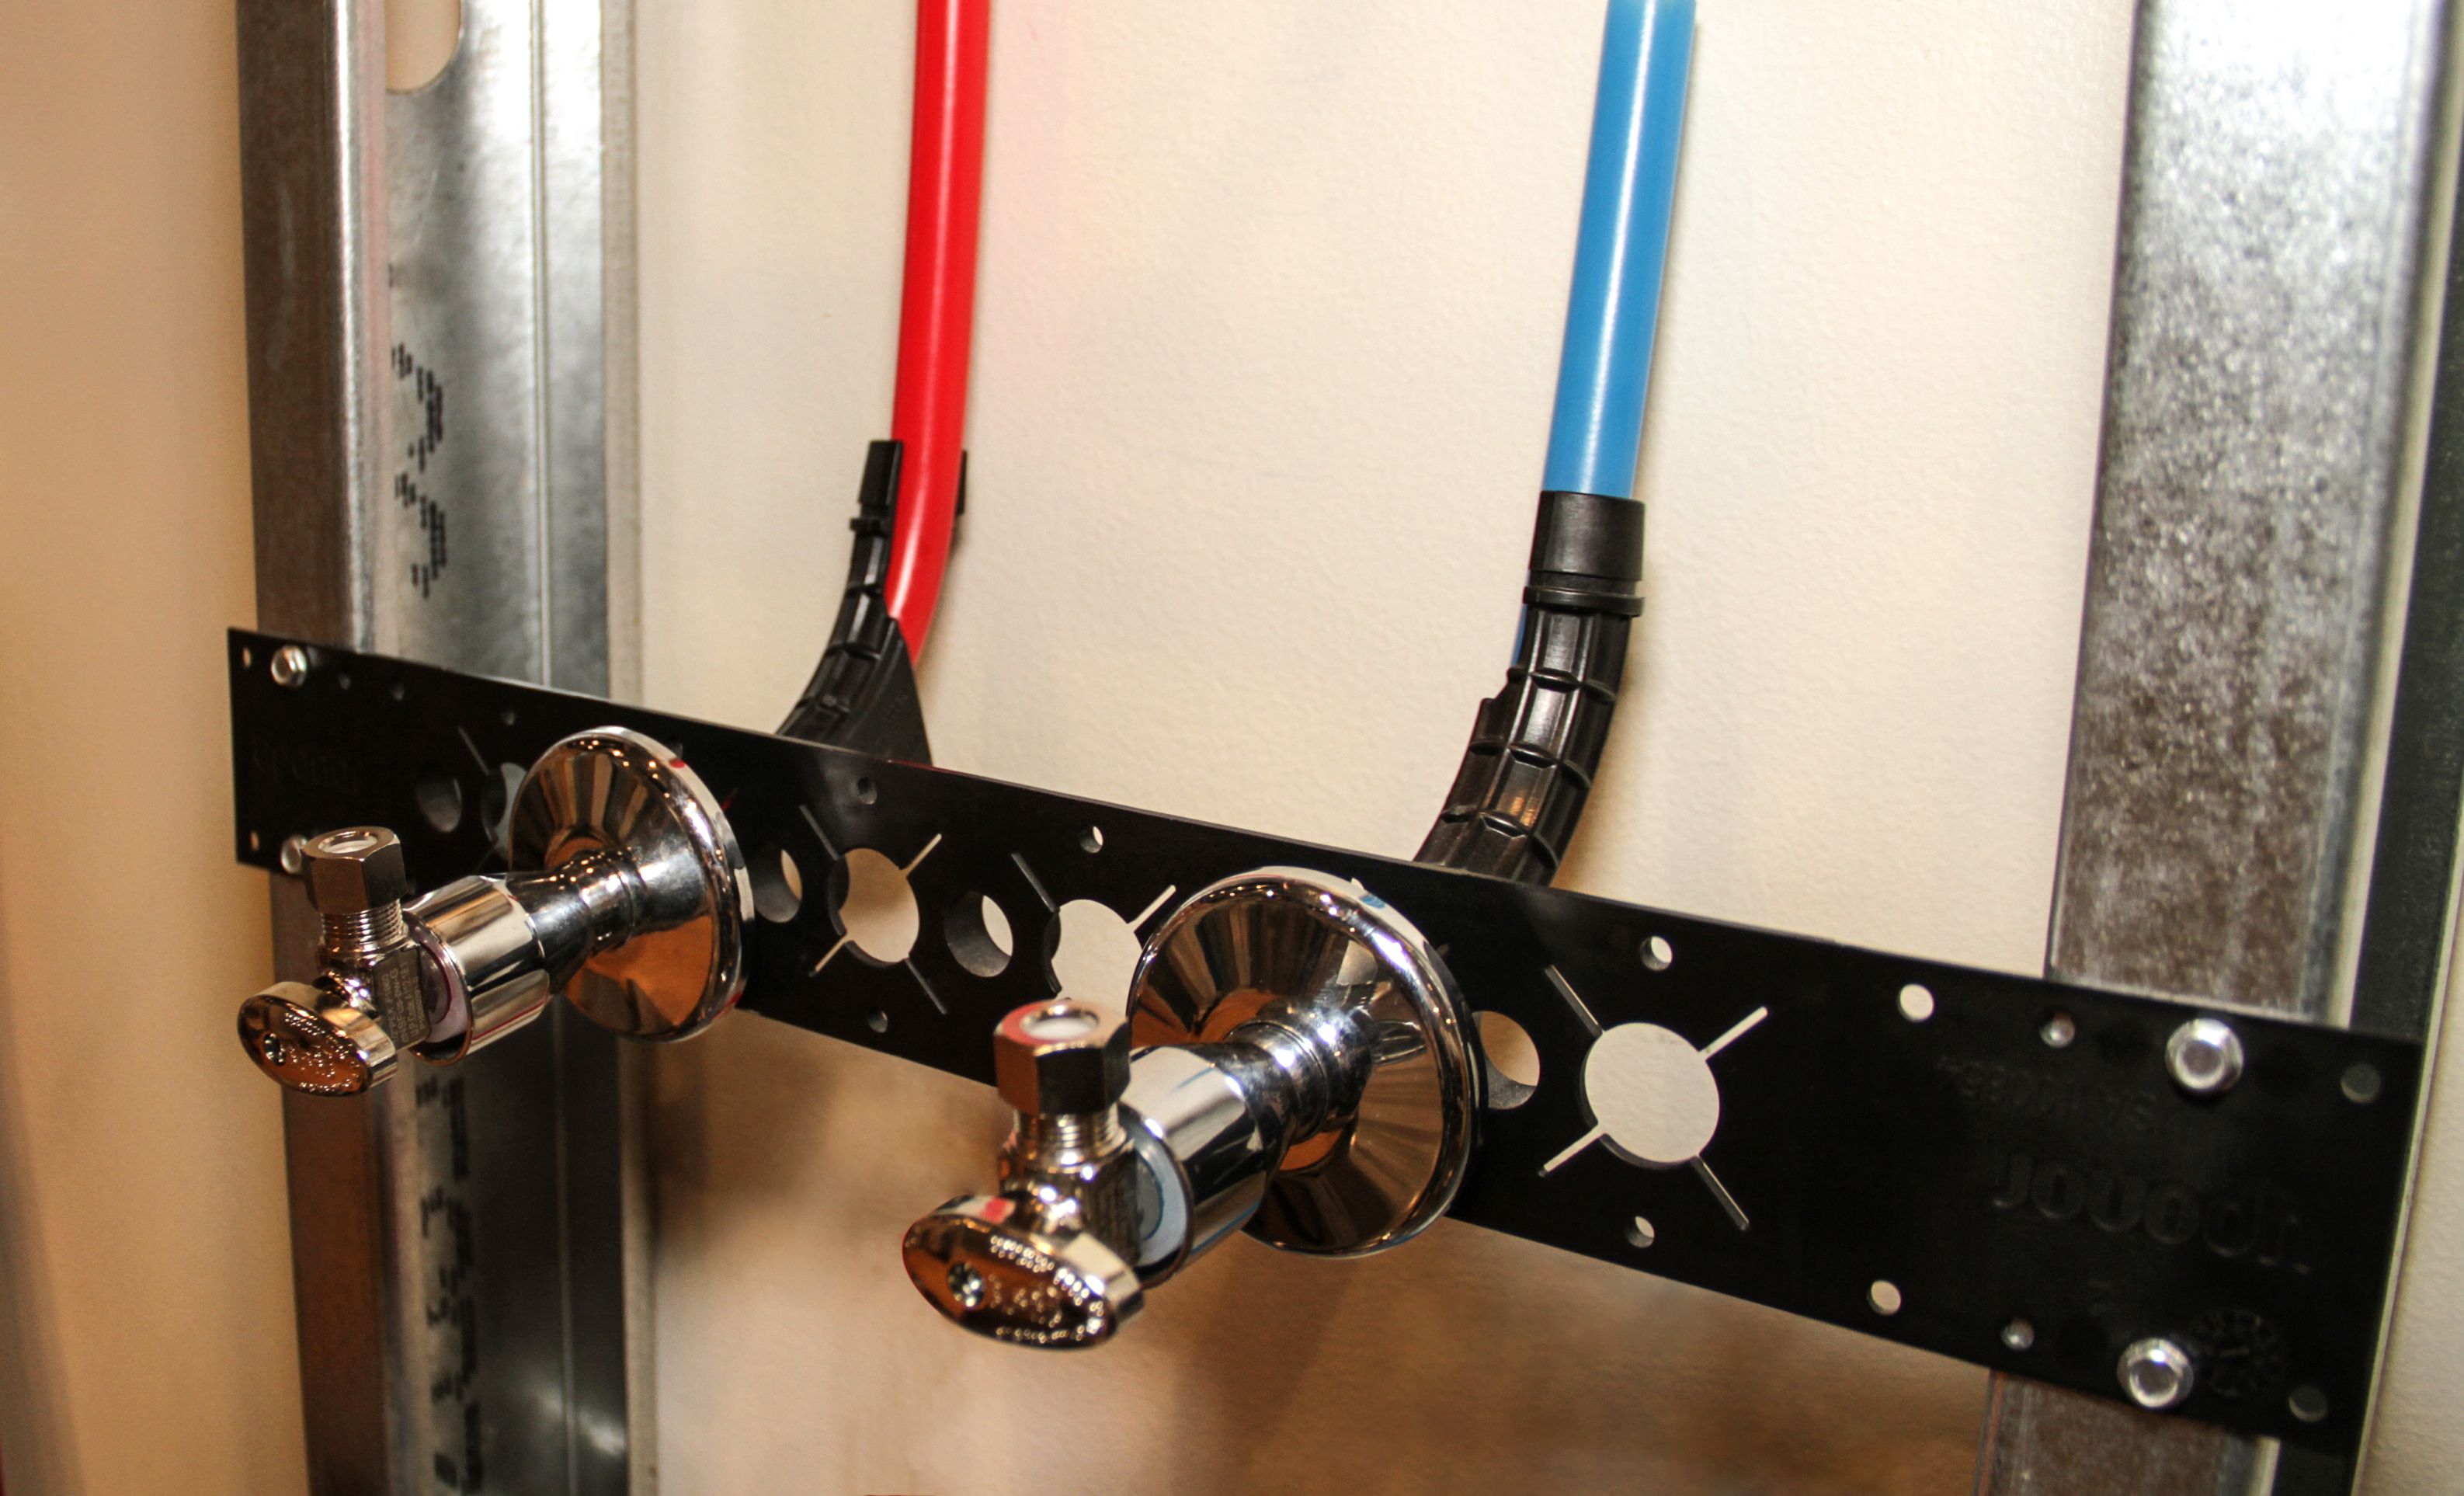 How To Secure Pex Shut Off Valve Tips for Choosing the Right Valves for PEX Piping Systems | phcppros